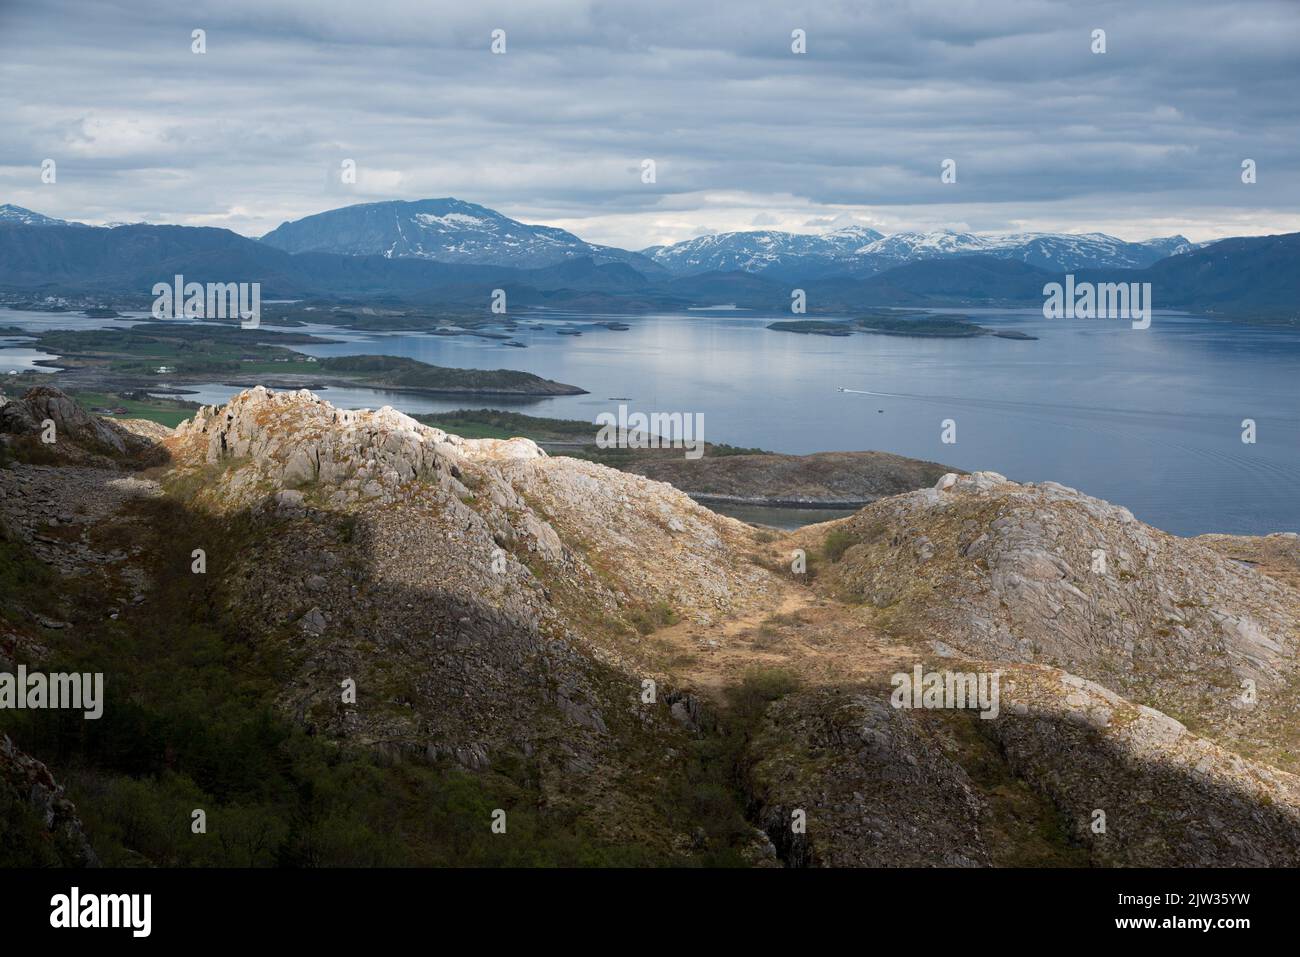 Torghatten is a granite dome in central Norway with great views to the skerries around Brønnøysund. Stock Photo